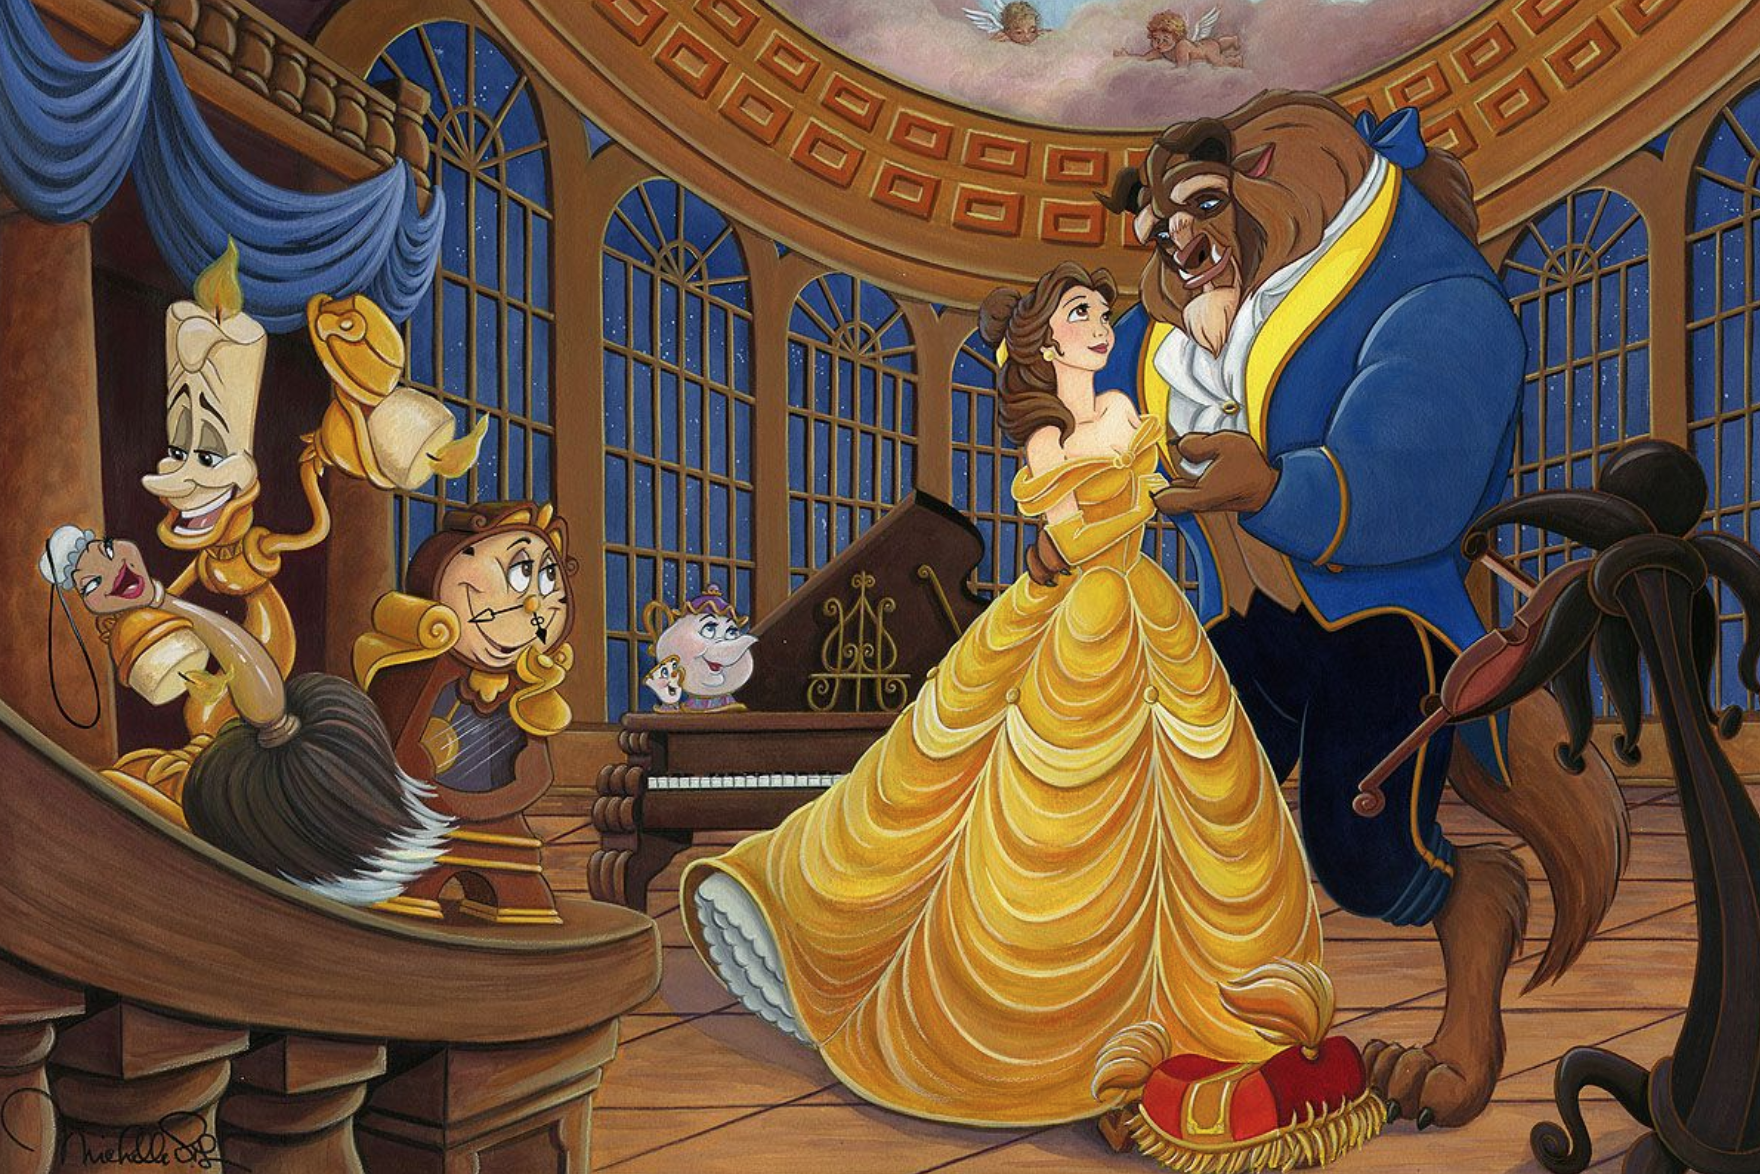 Beauty and the beast word puzzles